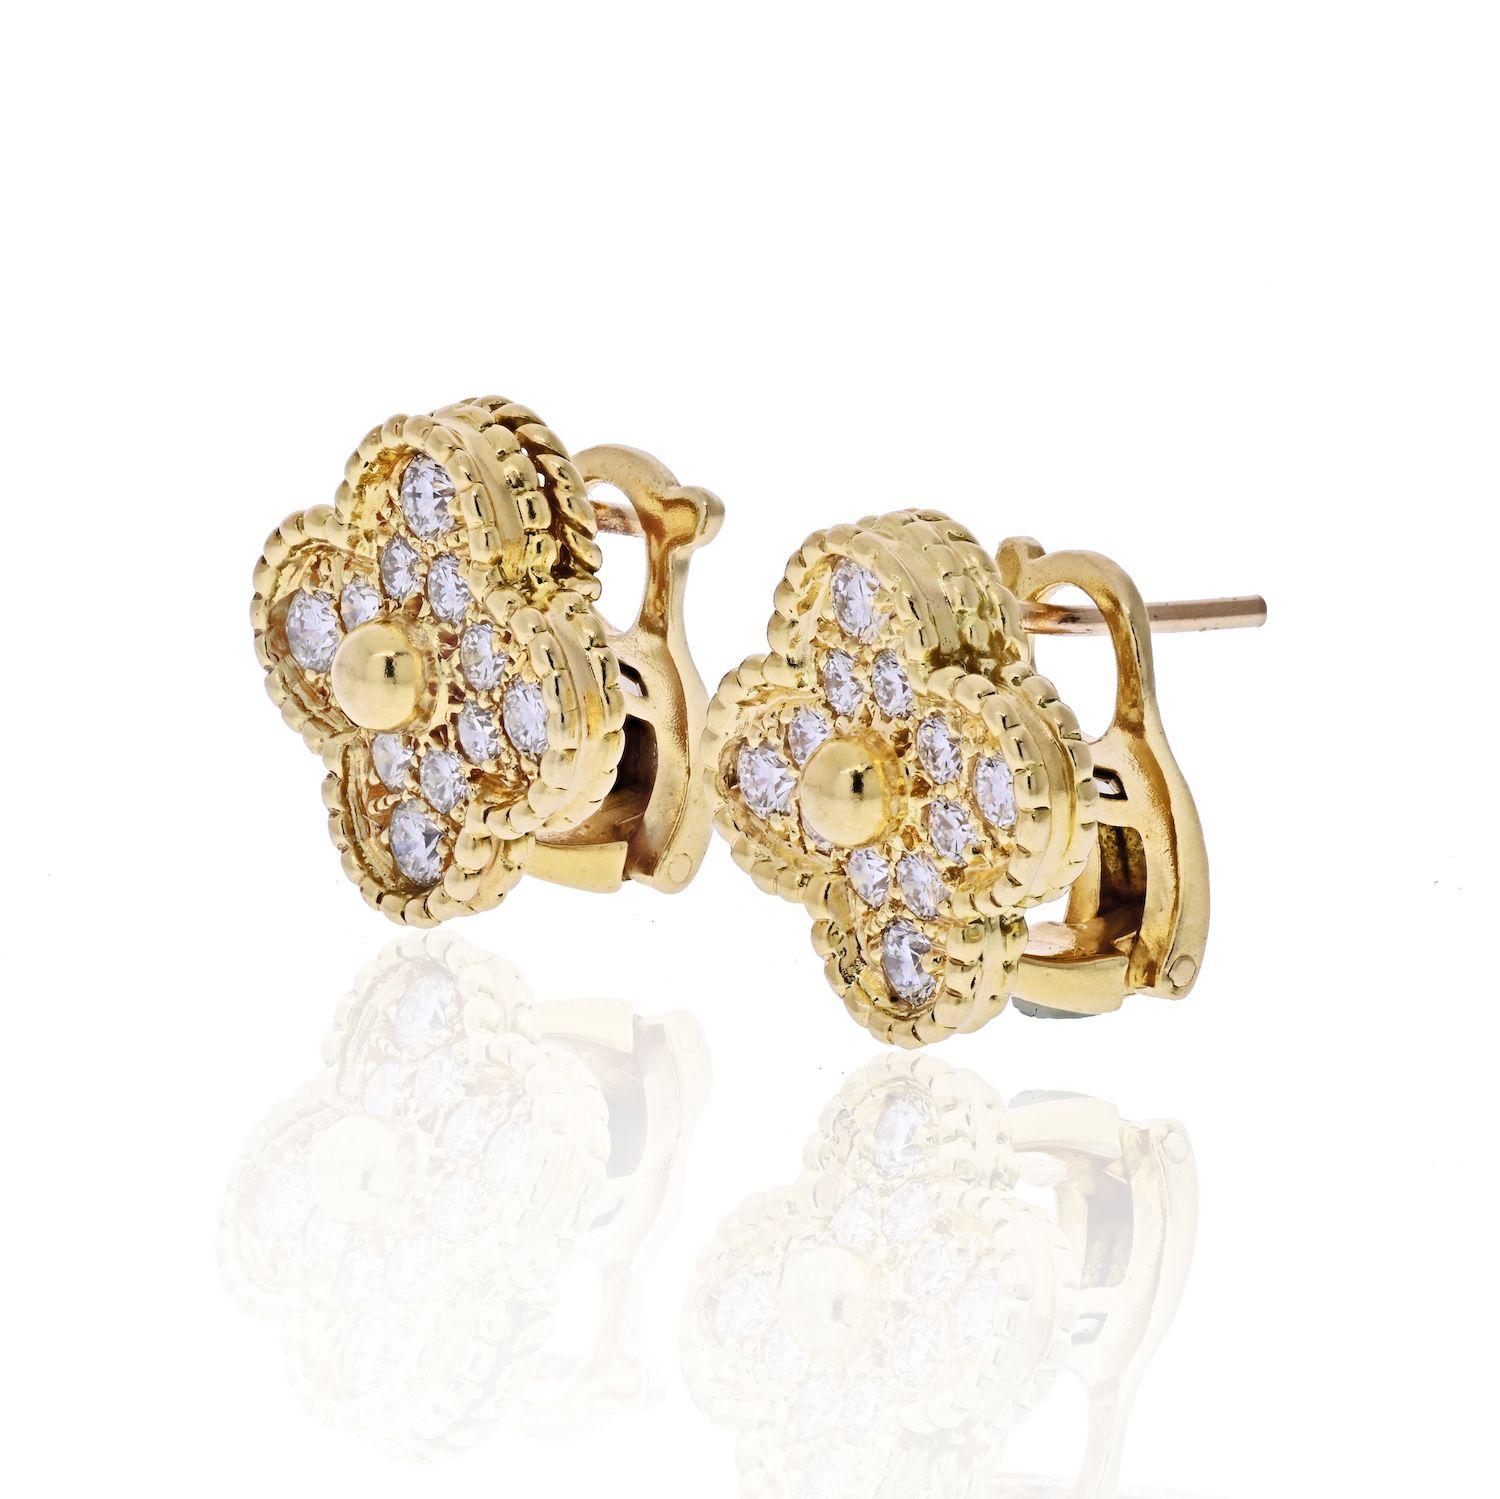 Vintage Alhambra earrings, yellow gold, round diamonds; diamond quality DEF, IF to VVS.
Round Cut Diamond: 24 stones, 0.97 carat.
Width: 14.6mm.
Posts with omega backing. 
VCA box included.